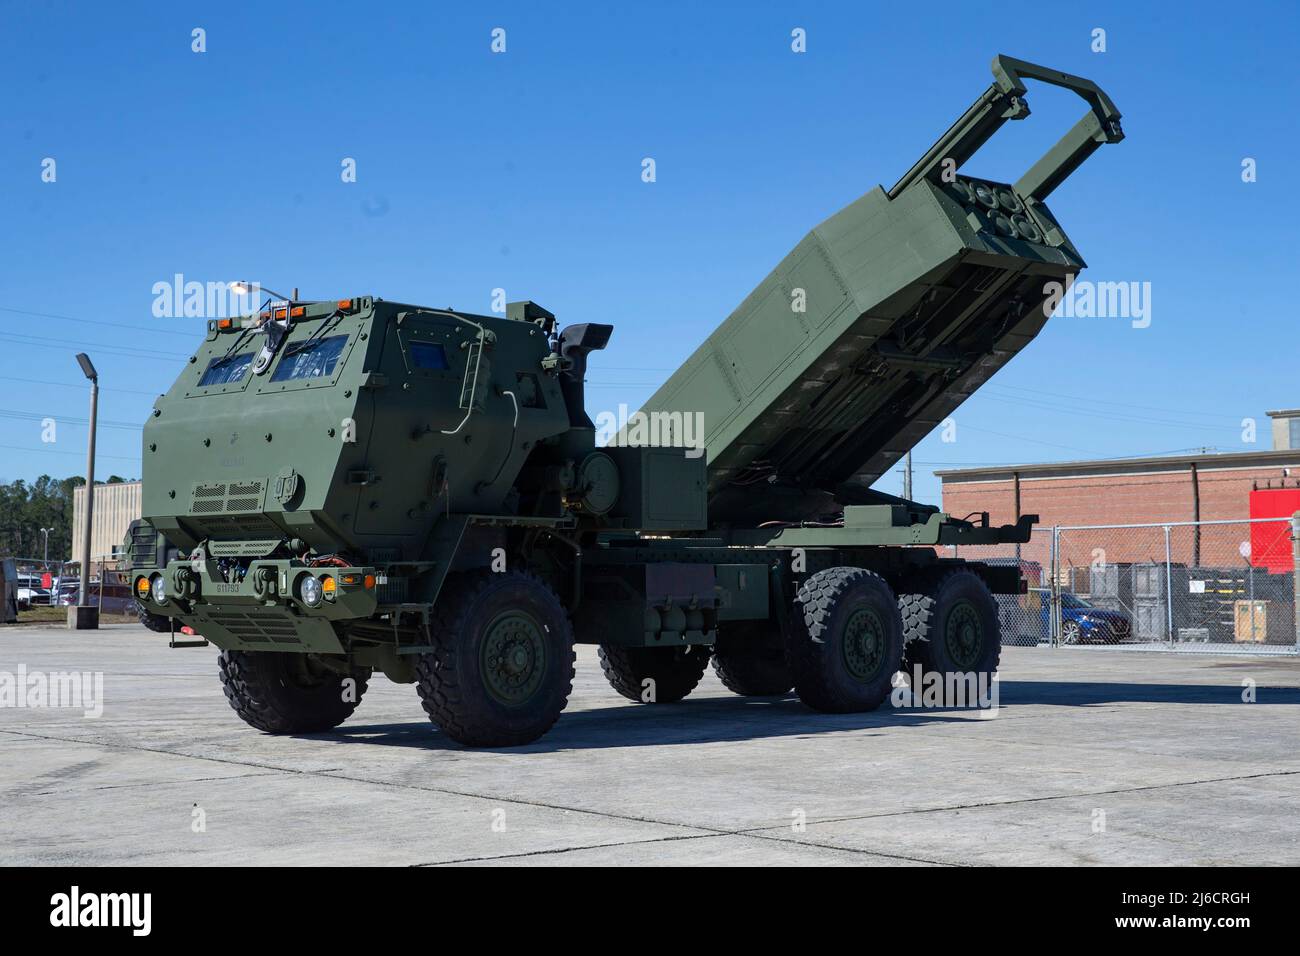 Camp Lejeune, United States. 23 February, 2021. A U.S. Marines Corps M142 High-Mobility Artillery Rocket System known as a HIMARS at Marine Corps Base Camp Lejeune, February 23, 2021 in Jacksonville, North Carolina. Credit: LCpl. Jennifer Reyes/US Marines Photo/Alamy Live News Stock Photo